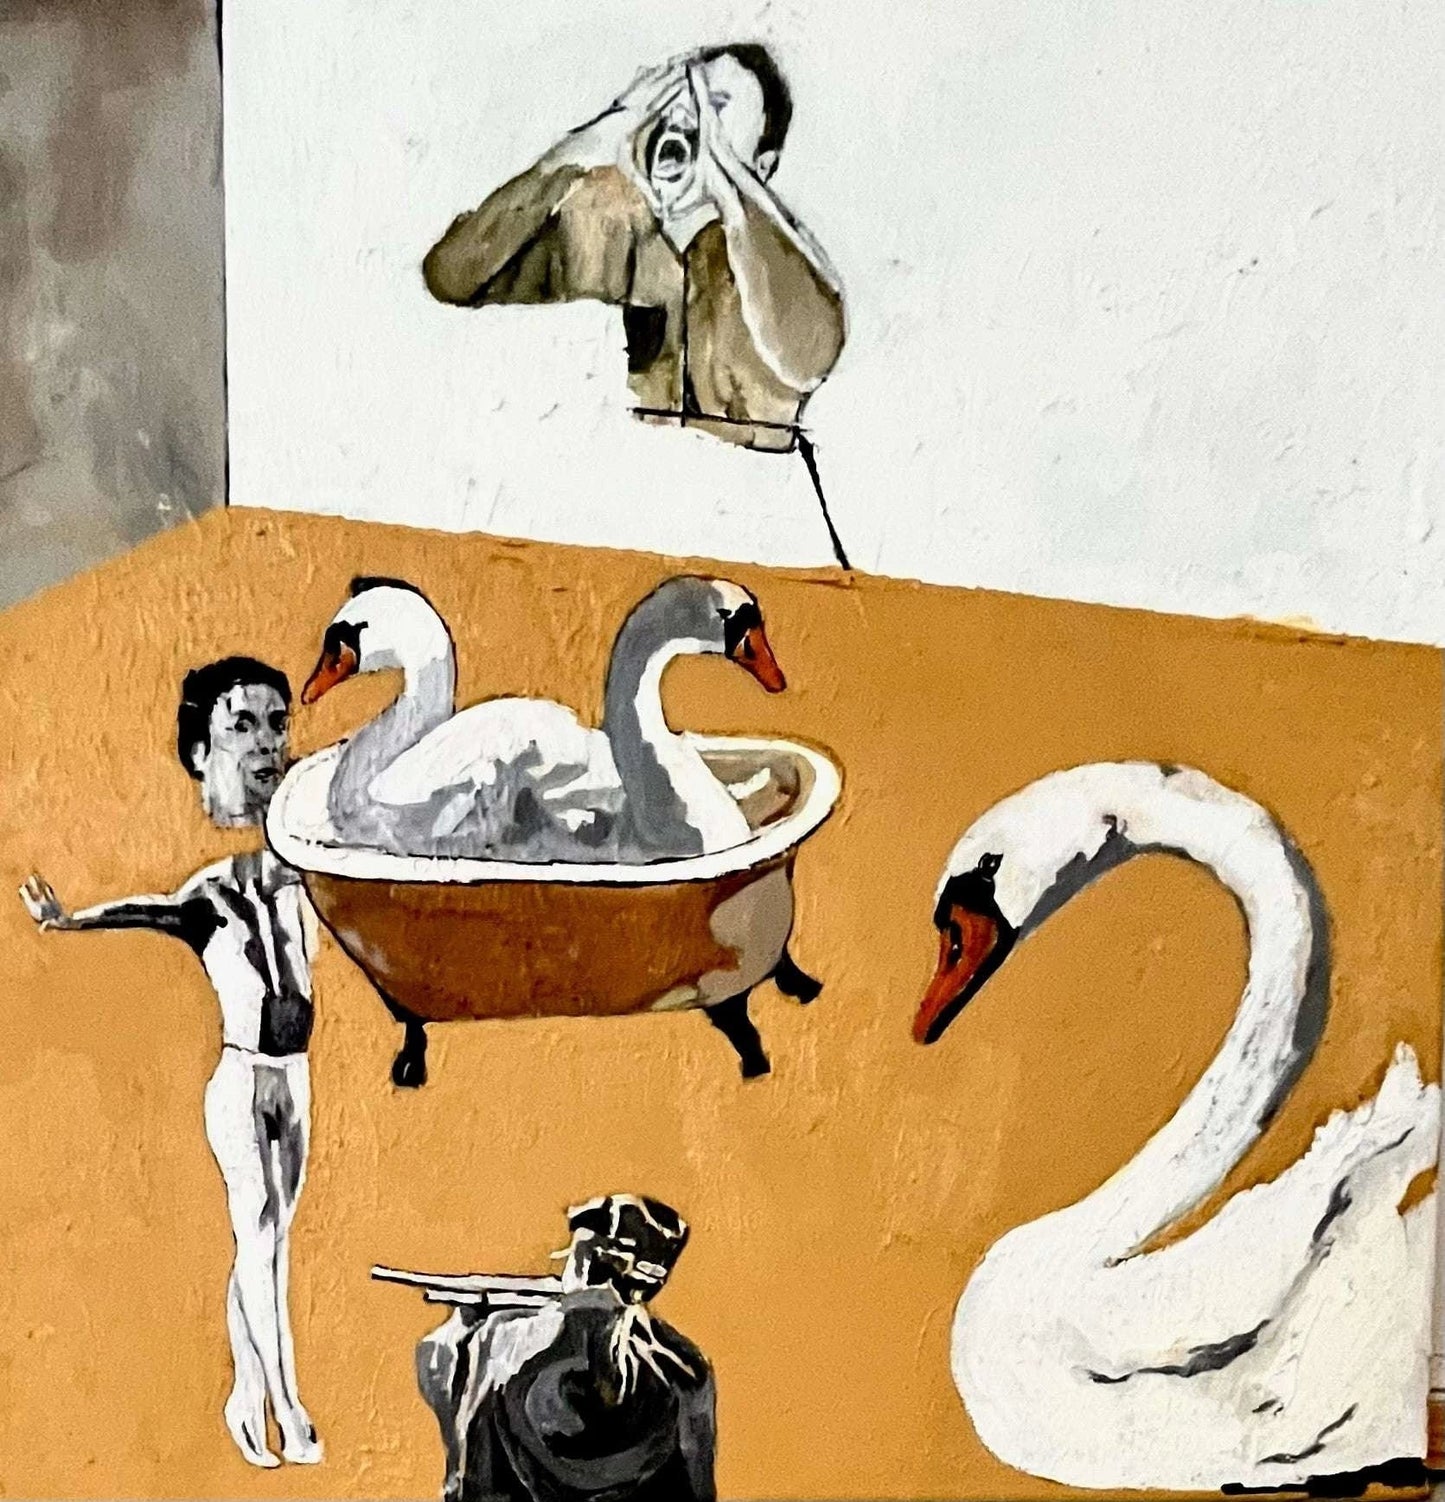 Margareta Gelles - If you damage a swan you have lost your light